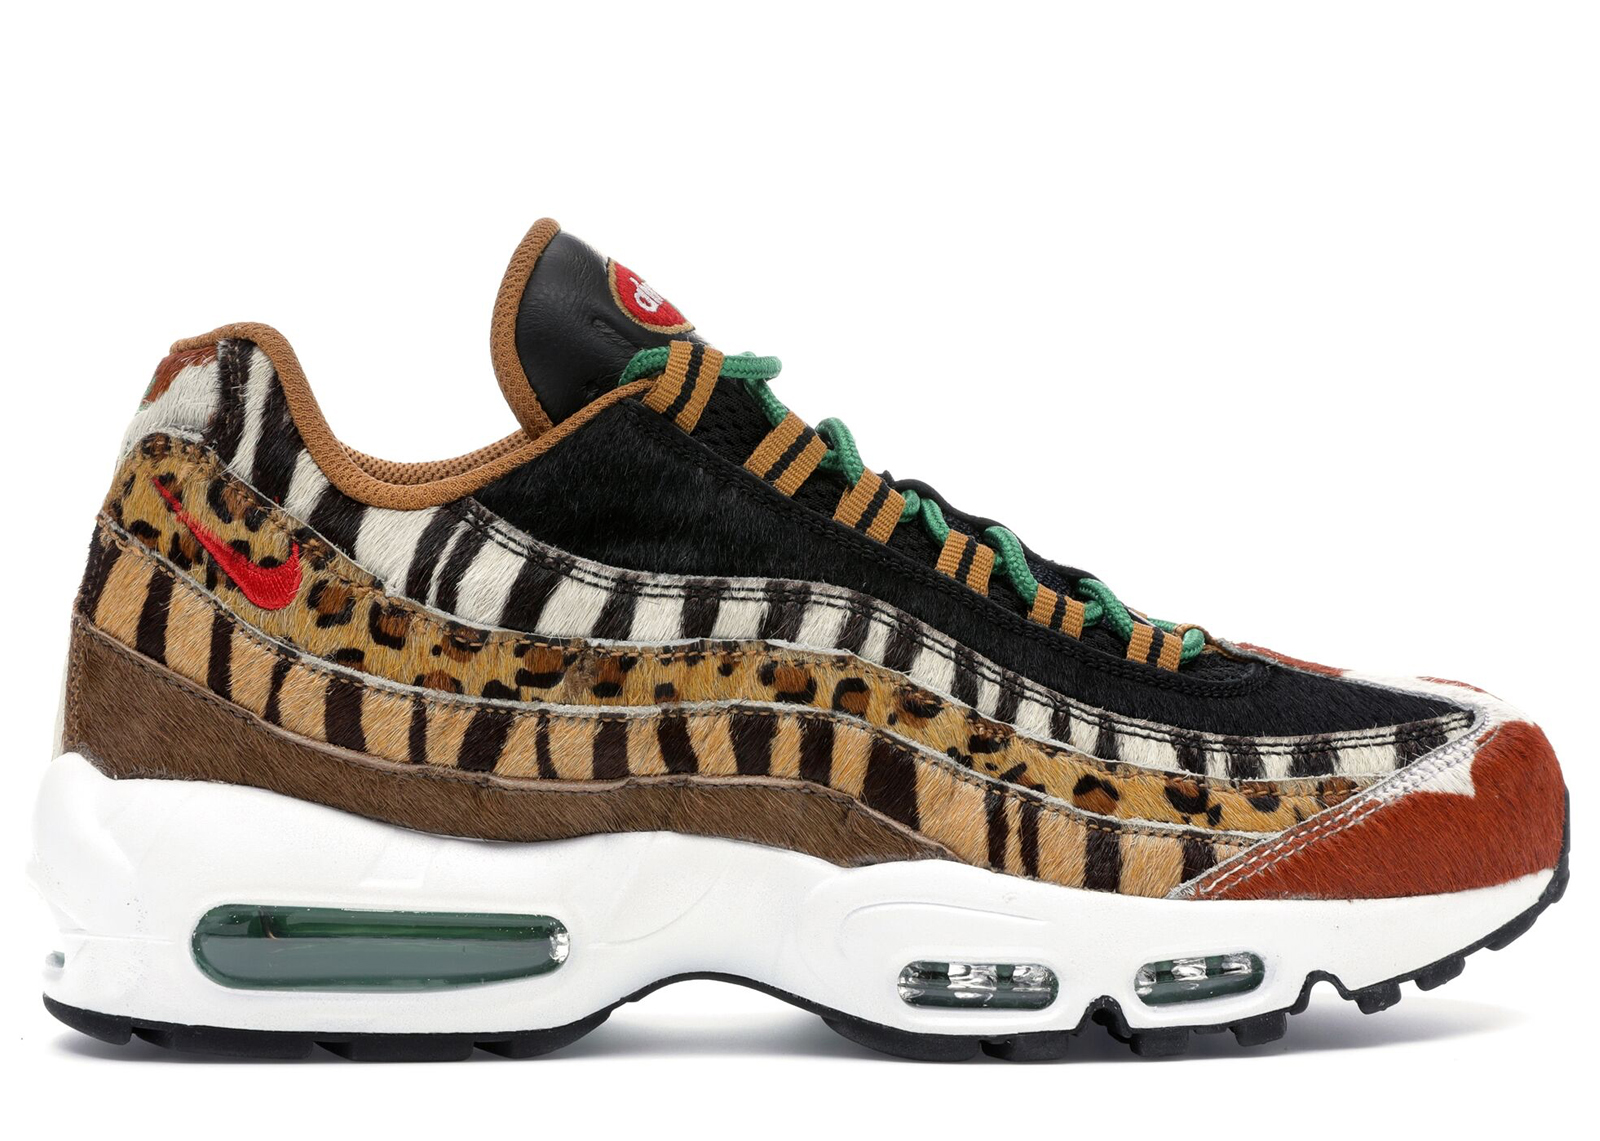 Nike Air Max 95 Shoes - Average Sale Price